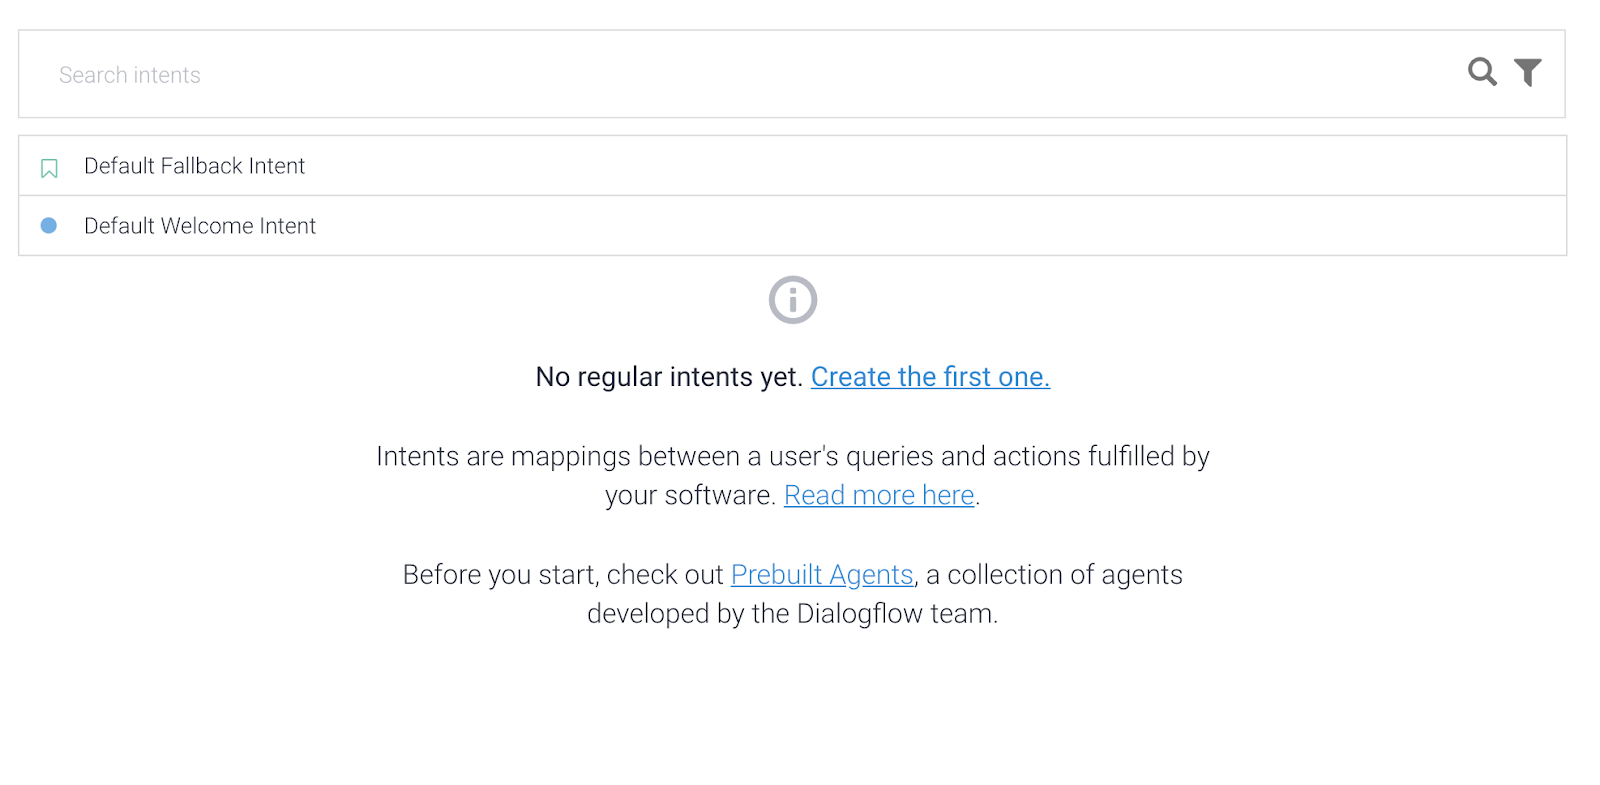 Every agent comes preset with a “Default Fallback Intent” and a “Default Welcome Intent”